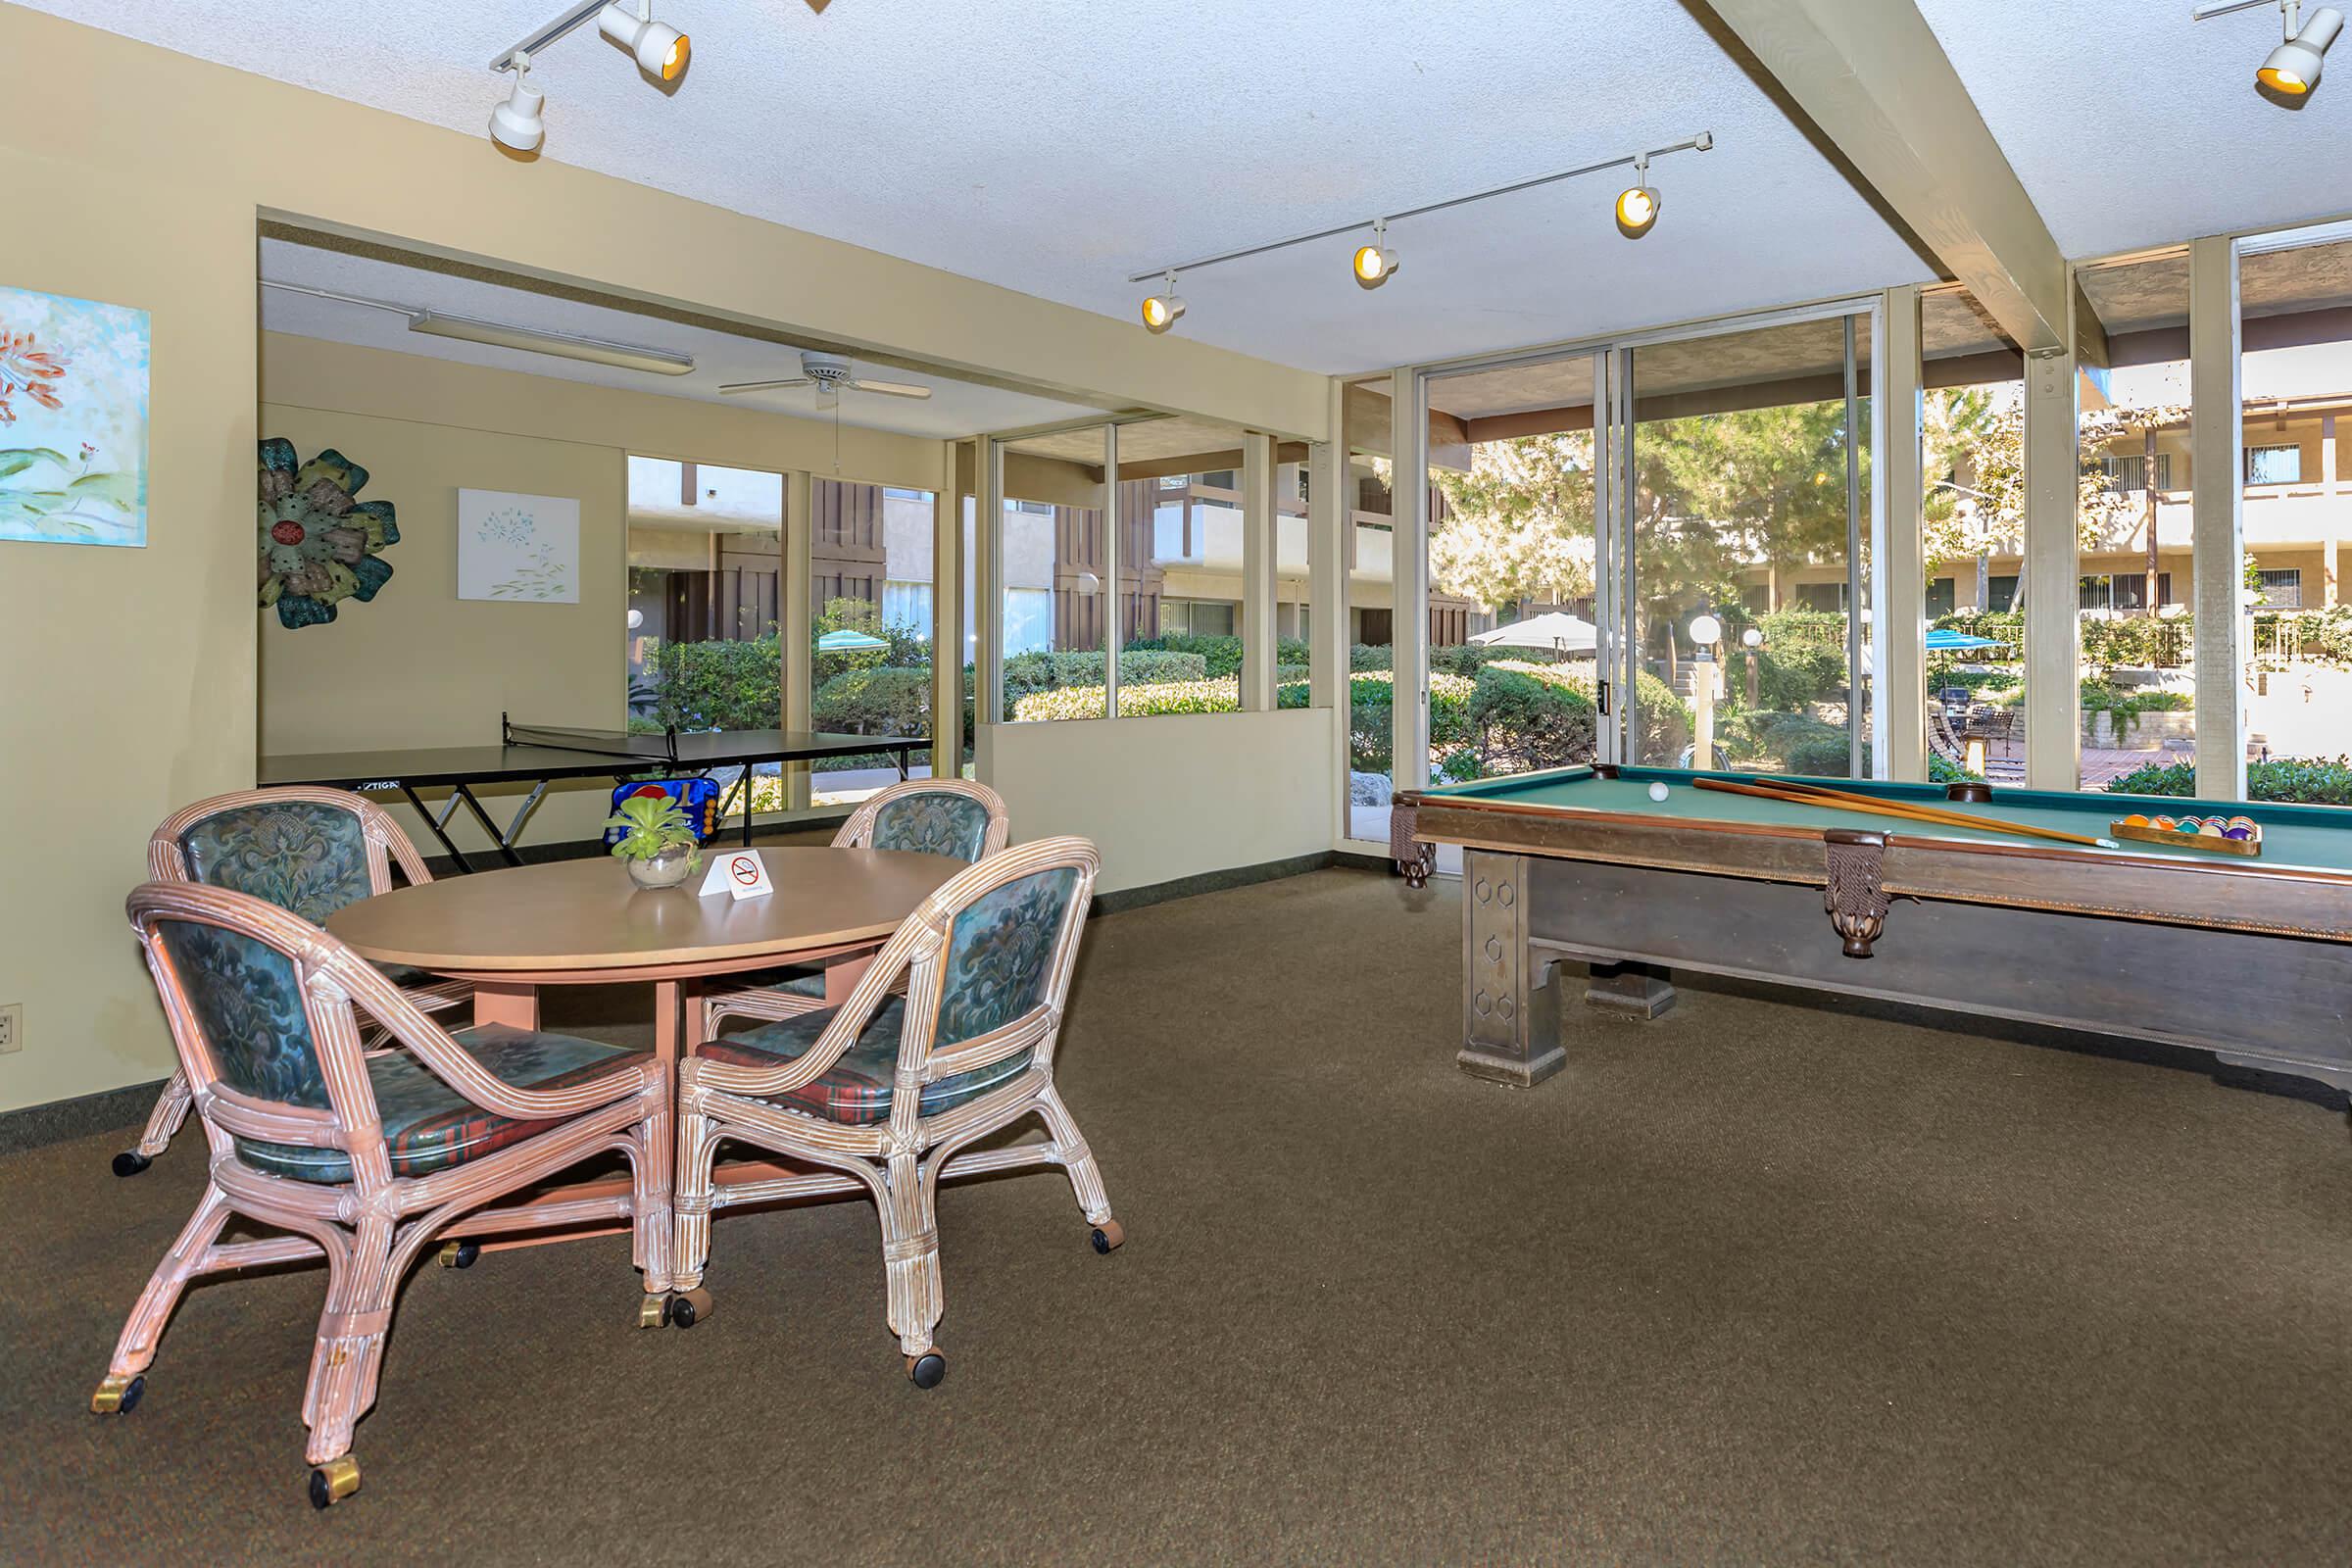 Emerald Victoria Apartments community room with a pool table